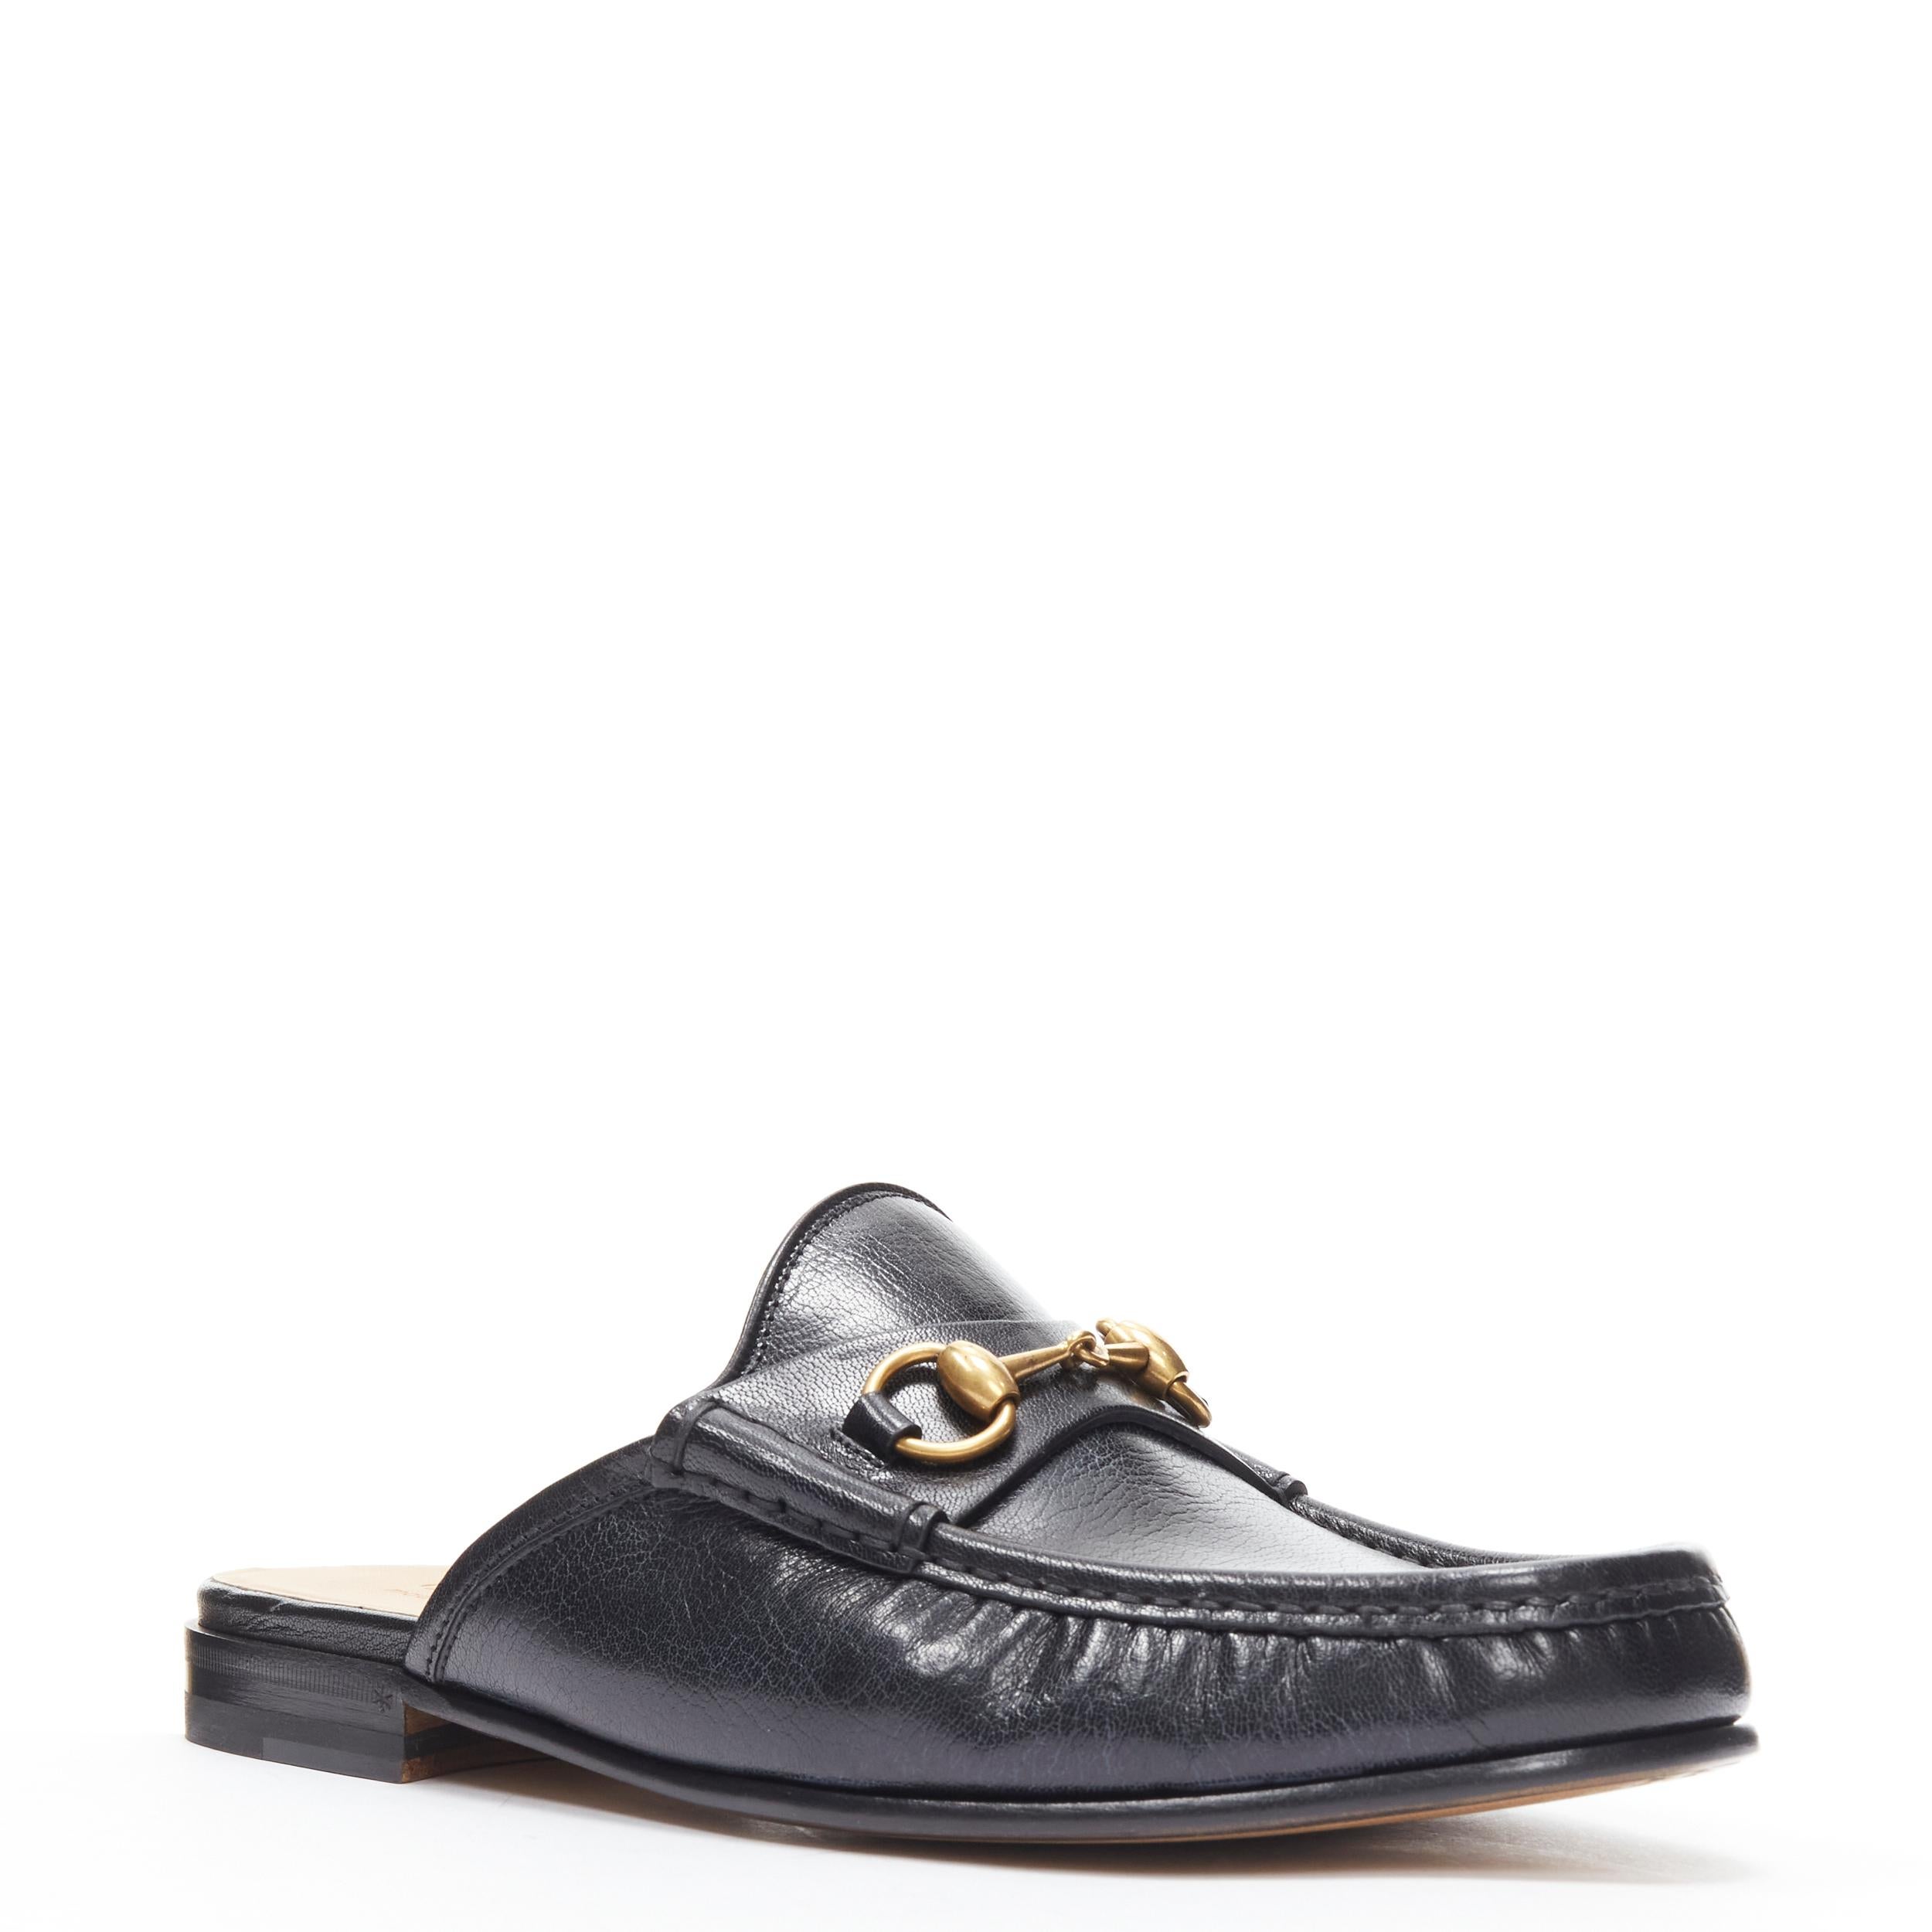 new GUCCI Quentin Nero black leather gold Horsebit slip on loafer UK8.5 US9.5 EU42.5 
Reference: TGAS/B02134 
Brand: Gucci 
Designer: Alessandro Michele 
Model: Quentin 
Material: Leather 
Color: Black 
Pattern: Solid 
Extra Detail: Quentin. Black